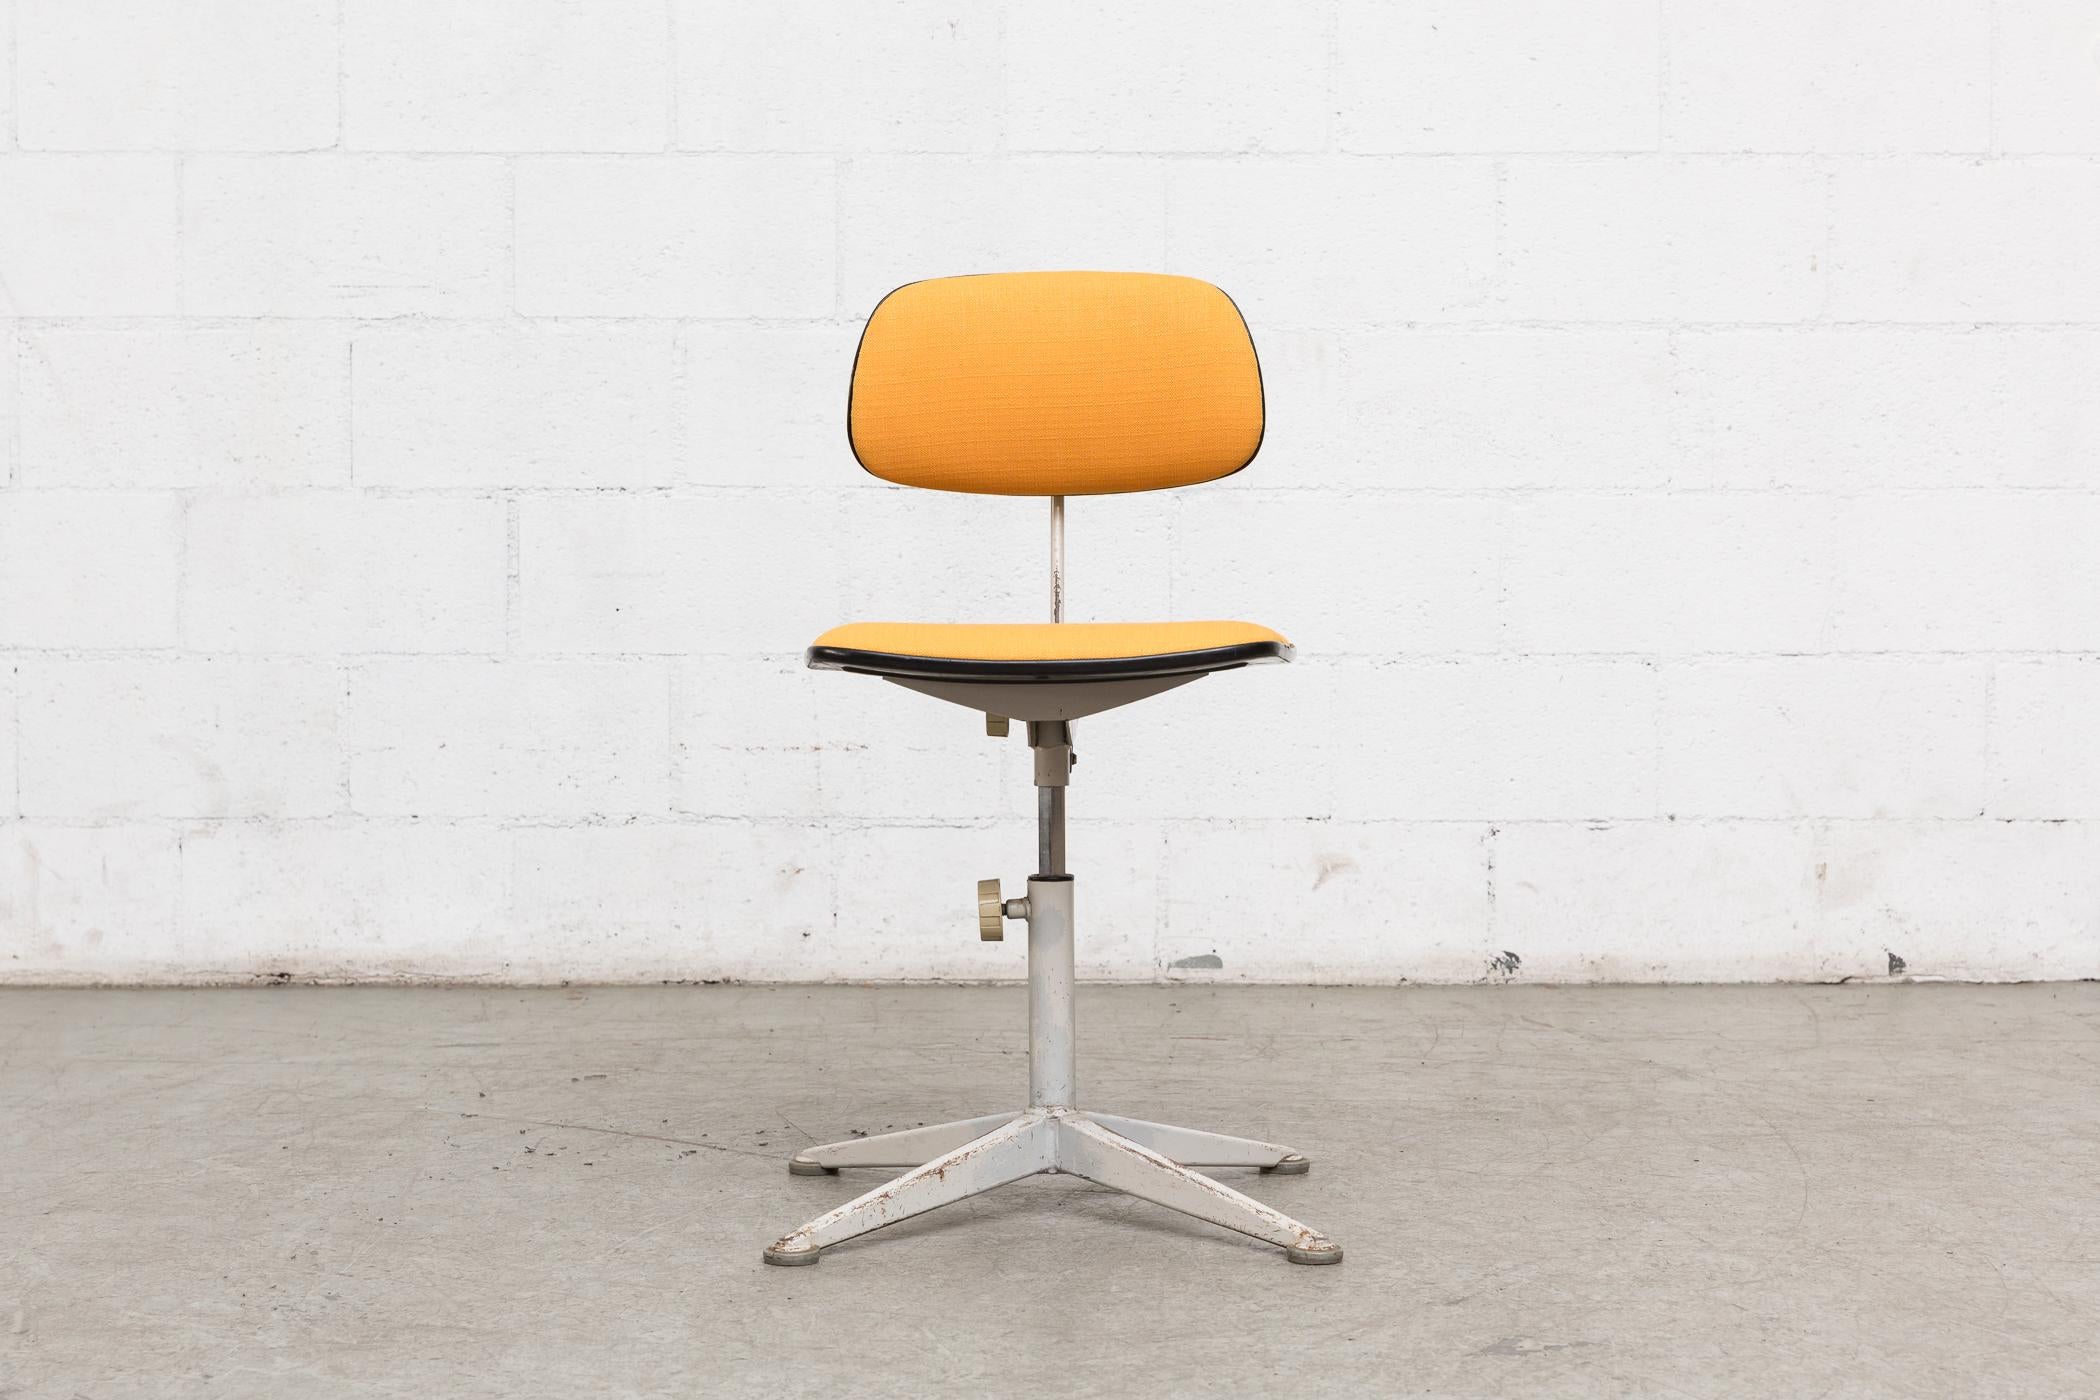 Friso Kramer drafting stool. Newly upholstered in mustard yellow with grey enameled steel frame. Adjustable seat and back height. Frame in original condition with visible wear for its age and usage.